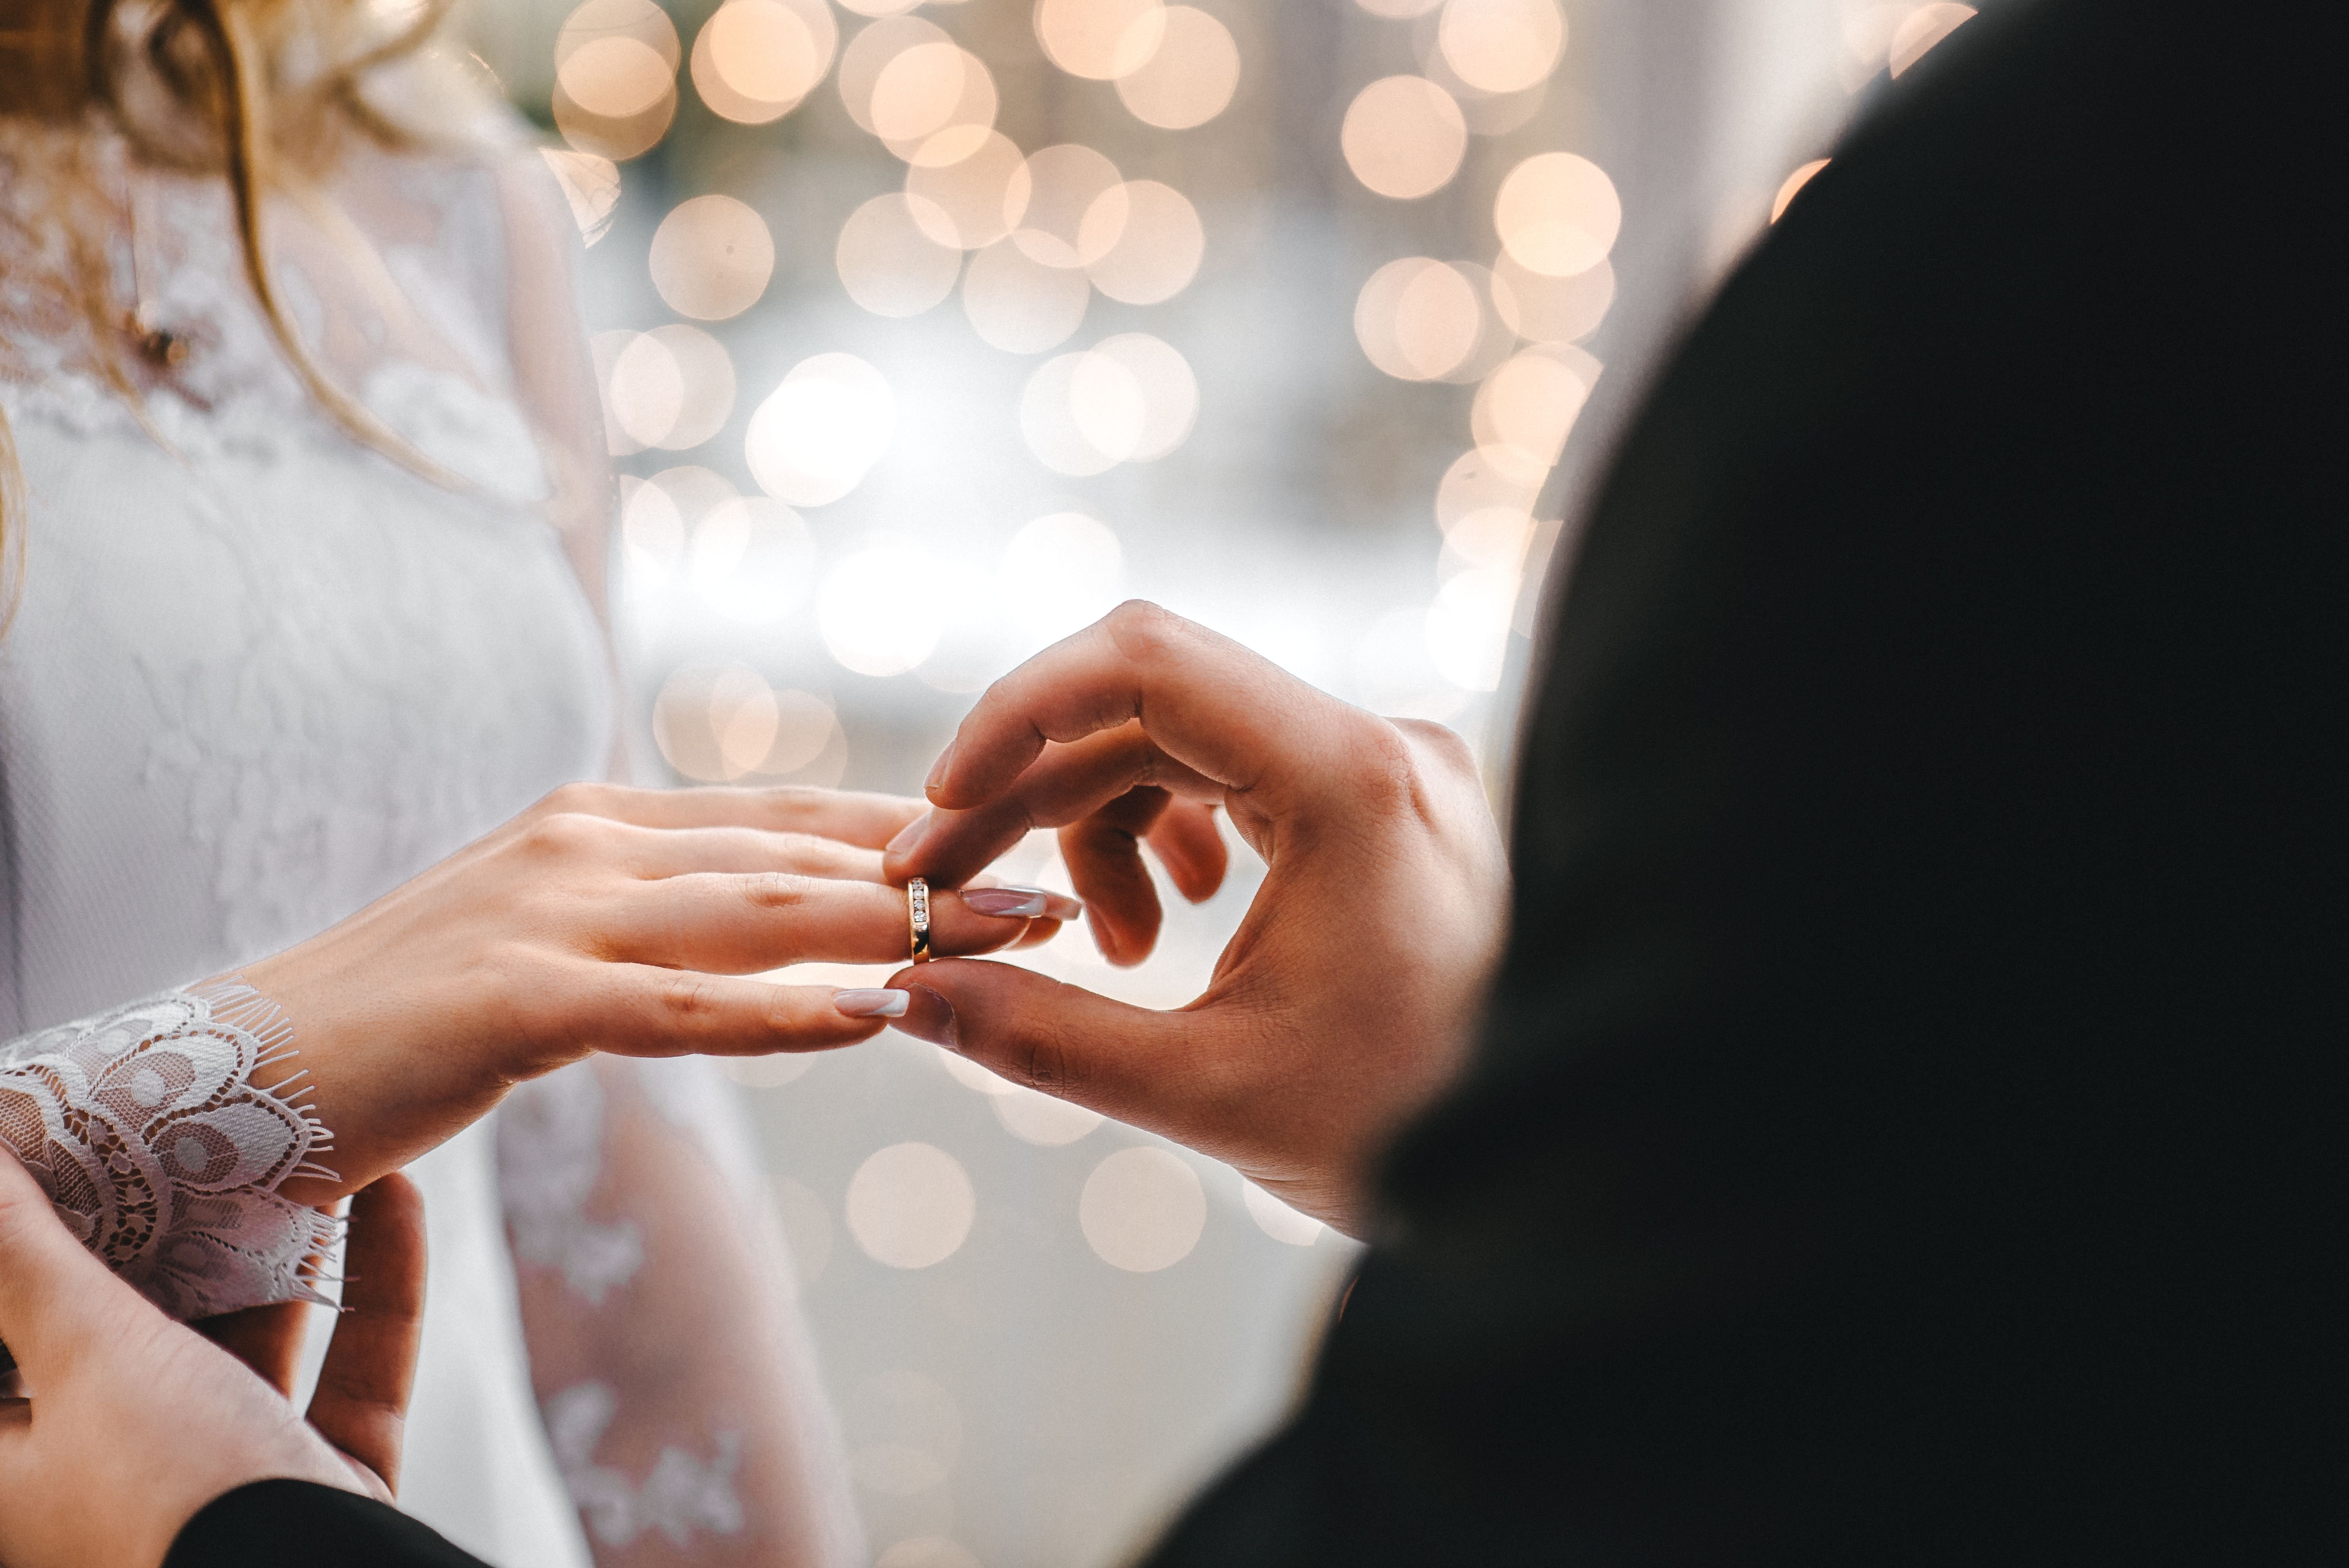 A man puts a ring on his bride's finger. | Source: Shutterstock